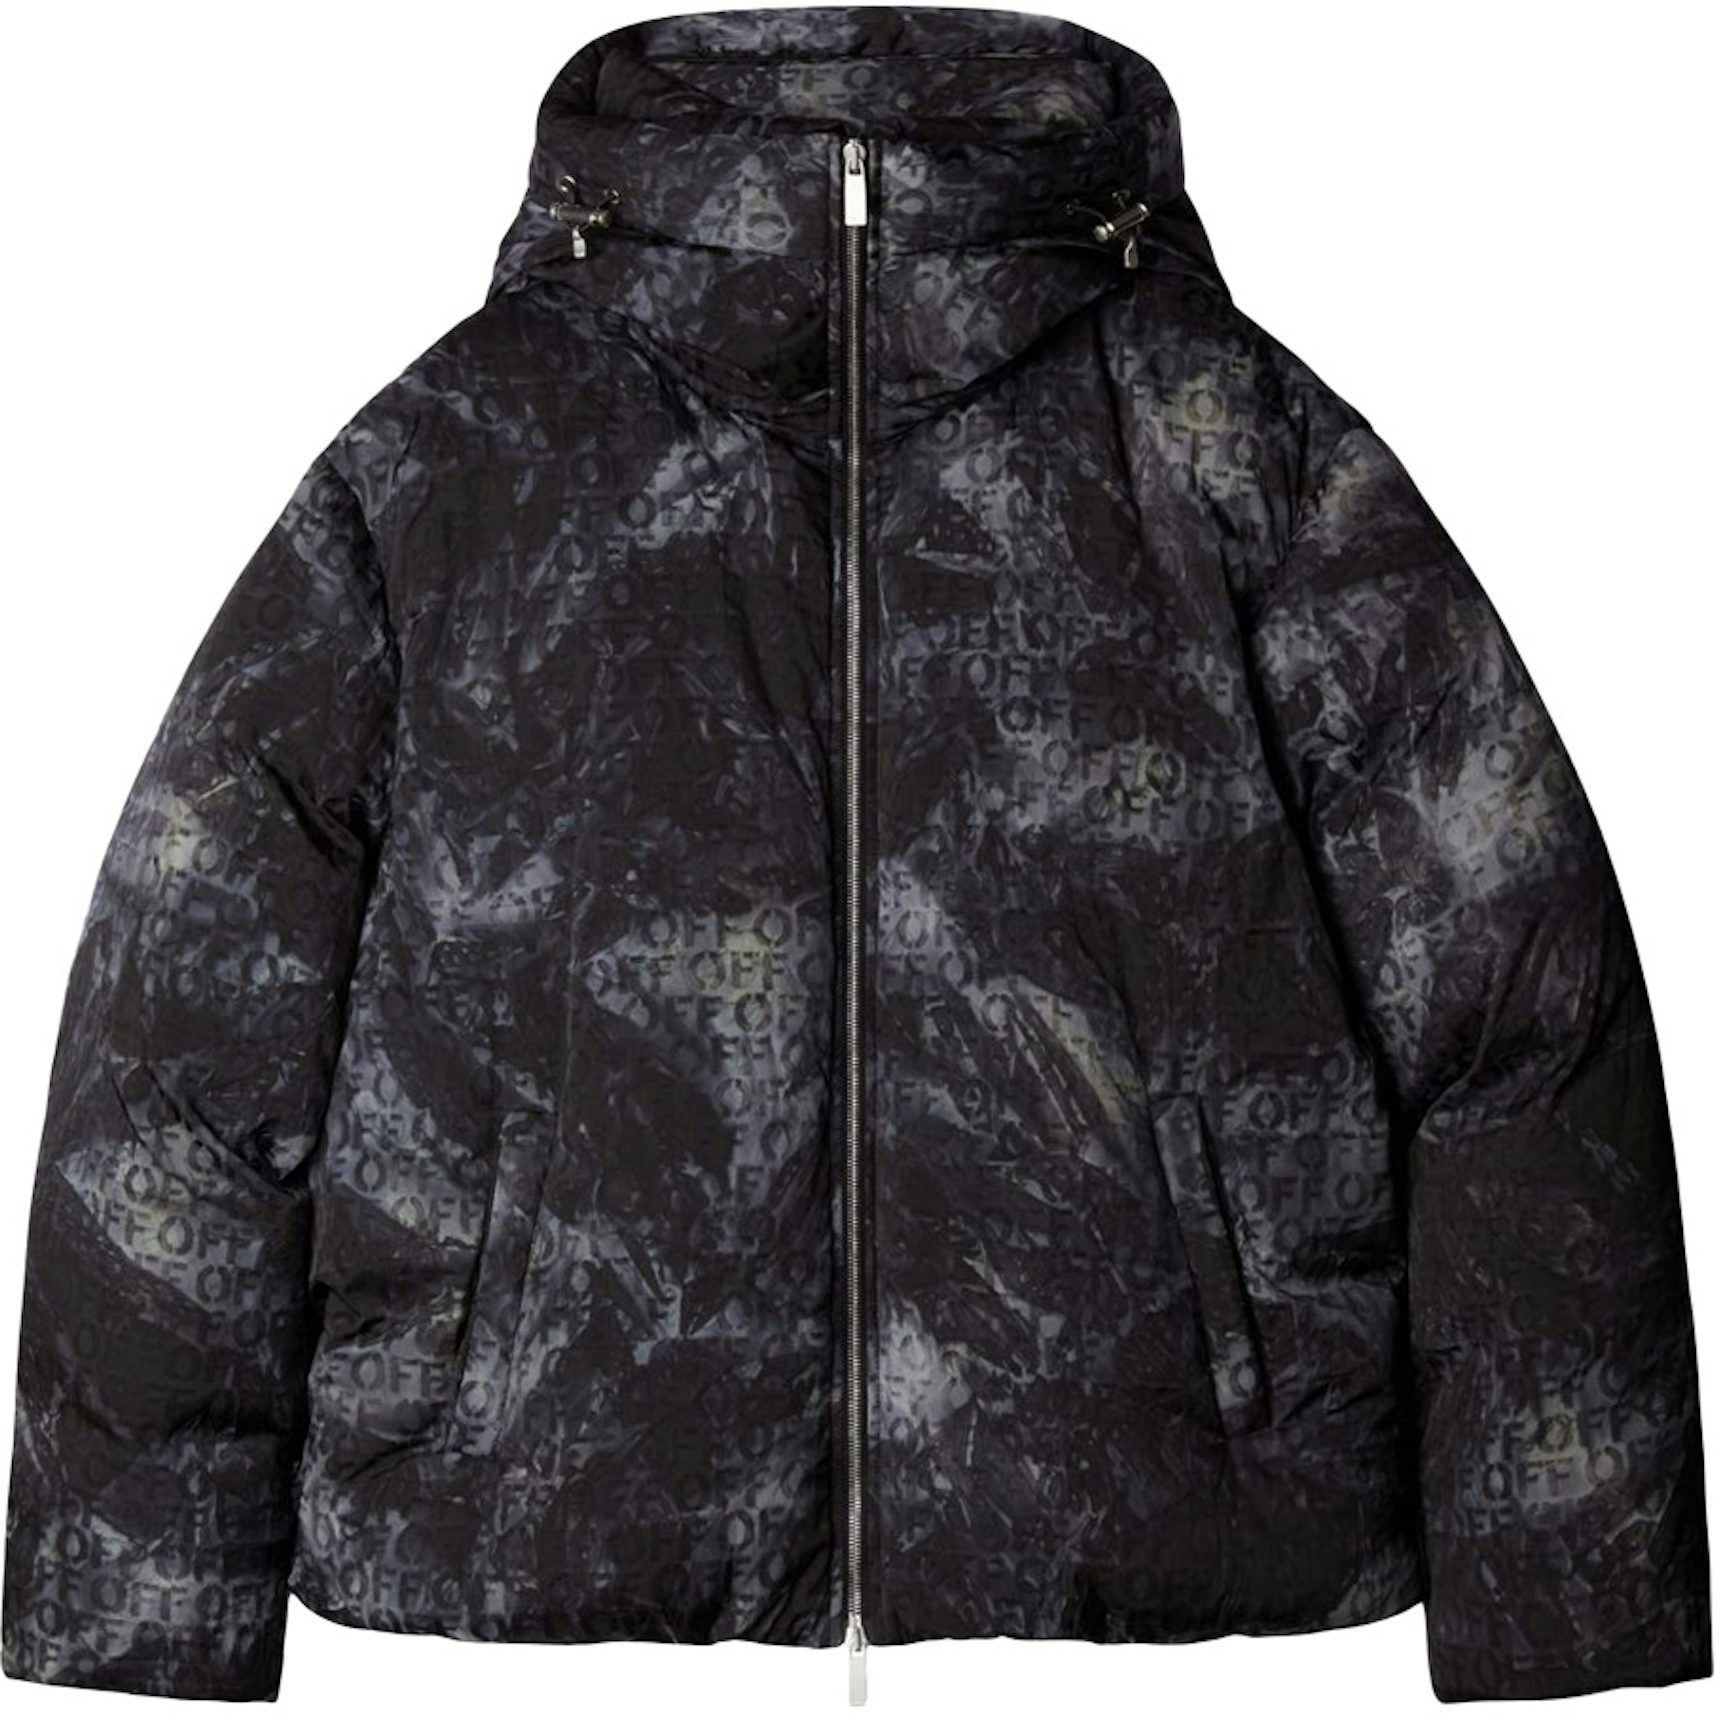 Louis Vuitton Blue Sky Printed Synthetic Hooded Jacket XXL Louis Vuitton